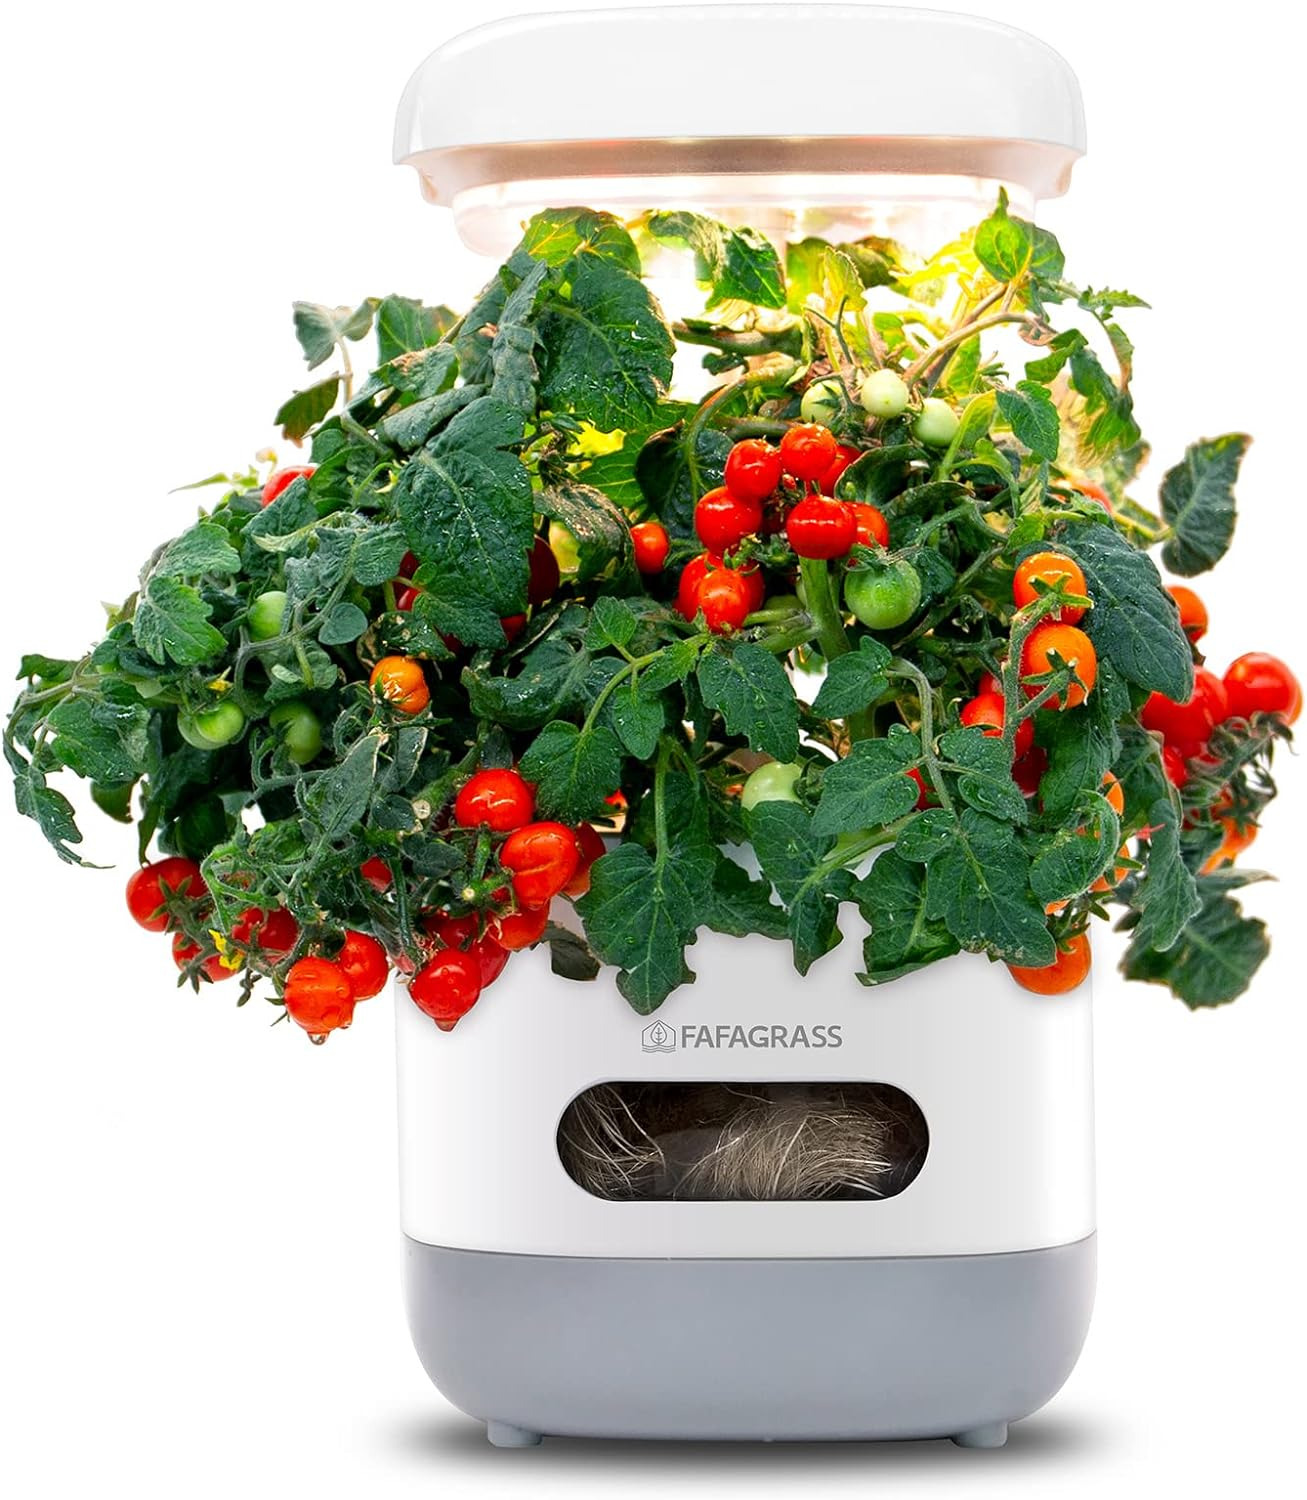 Mini Herb & Vegetable Hydroponics System: Countertop Grower with Adjustable Pump